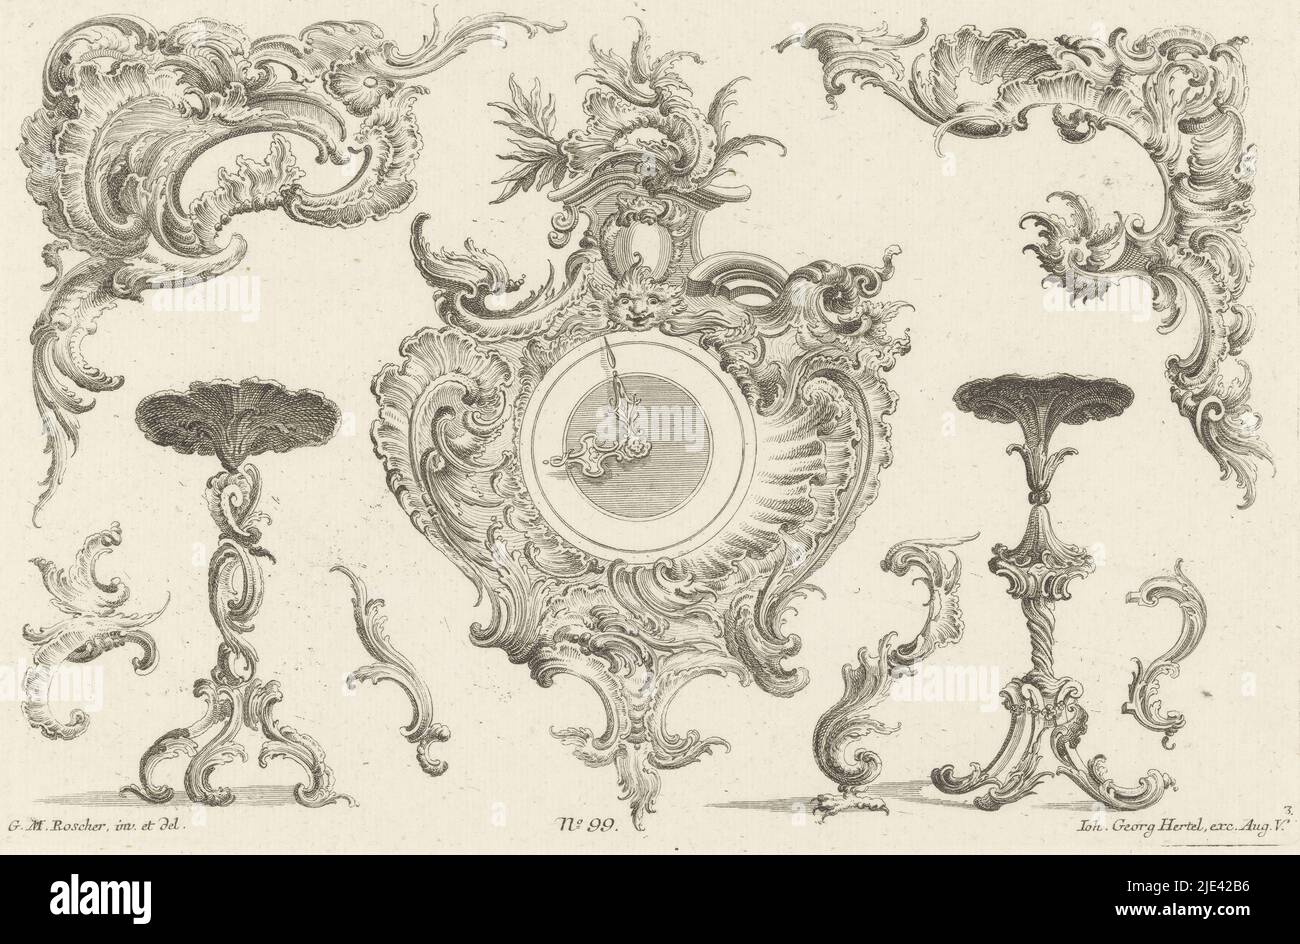 Clock and tables, anonymous, after Georg Michel Roscher, 1705 - 1775, Rocaille ornaments and clock and high side tables with rocaille base. Publisher's number 99., print maker: anonymous, Georg Michel Roscher, (mentioned on object), publisher: Johann Georg Hertel (I), (mentioned on object), Augsburg, 1705 - 1775, paper, etching, h 195 mm - w 296 mm Stock Photo